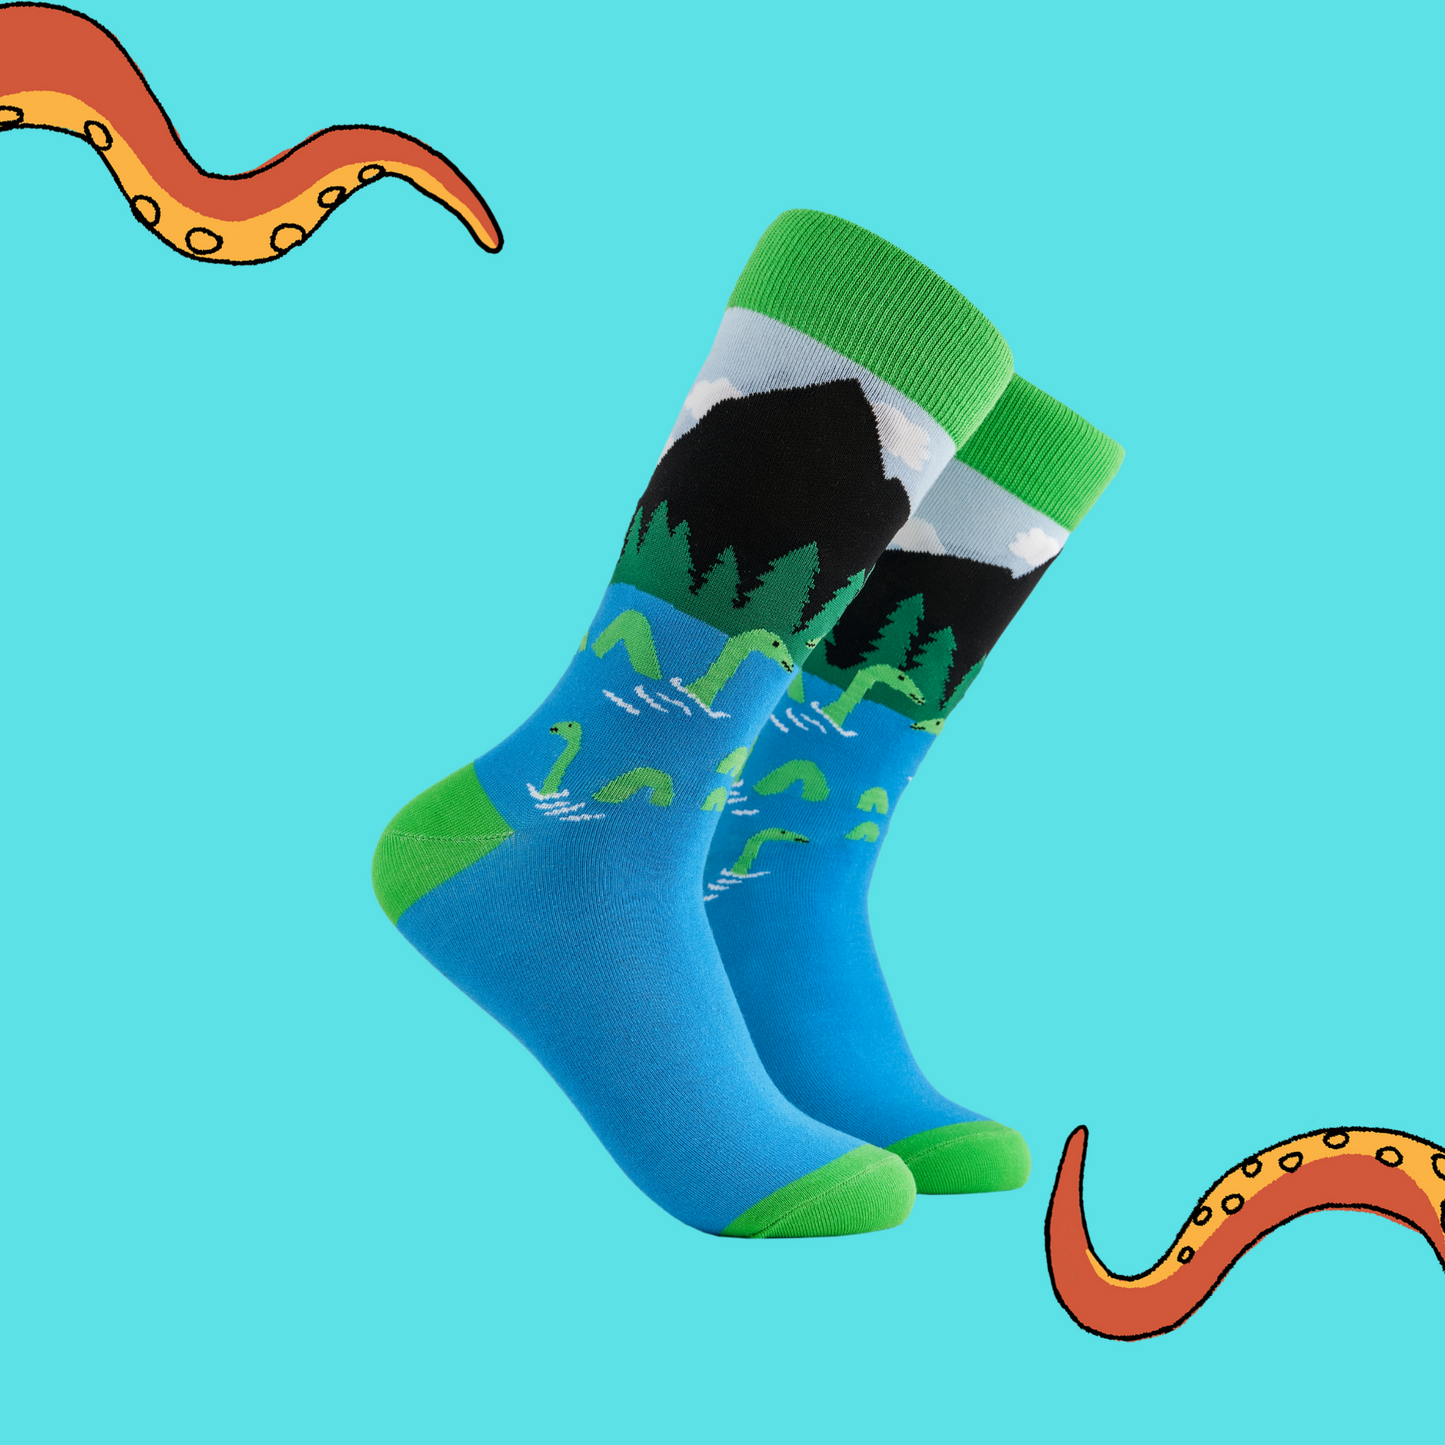 A pair of socks depicting the loch ness monster. Blue legs, green cuff, heel and toe.